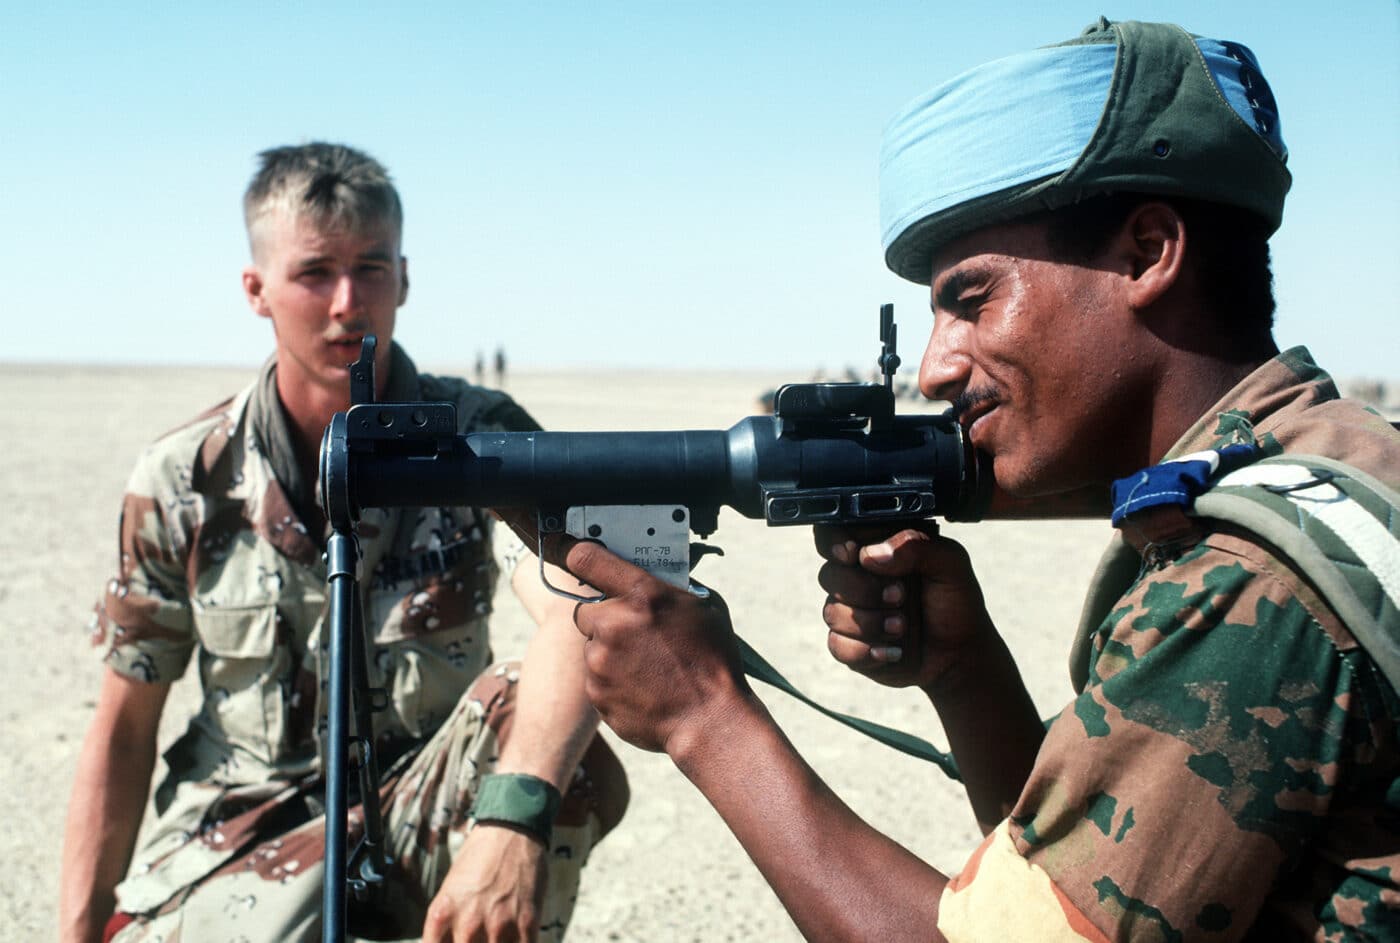 us army soldier and Egyptian soldier train with rpg-7